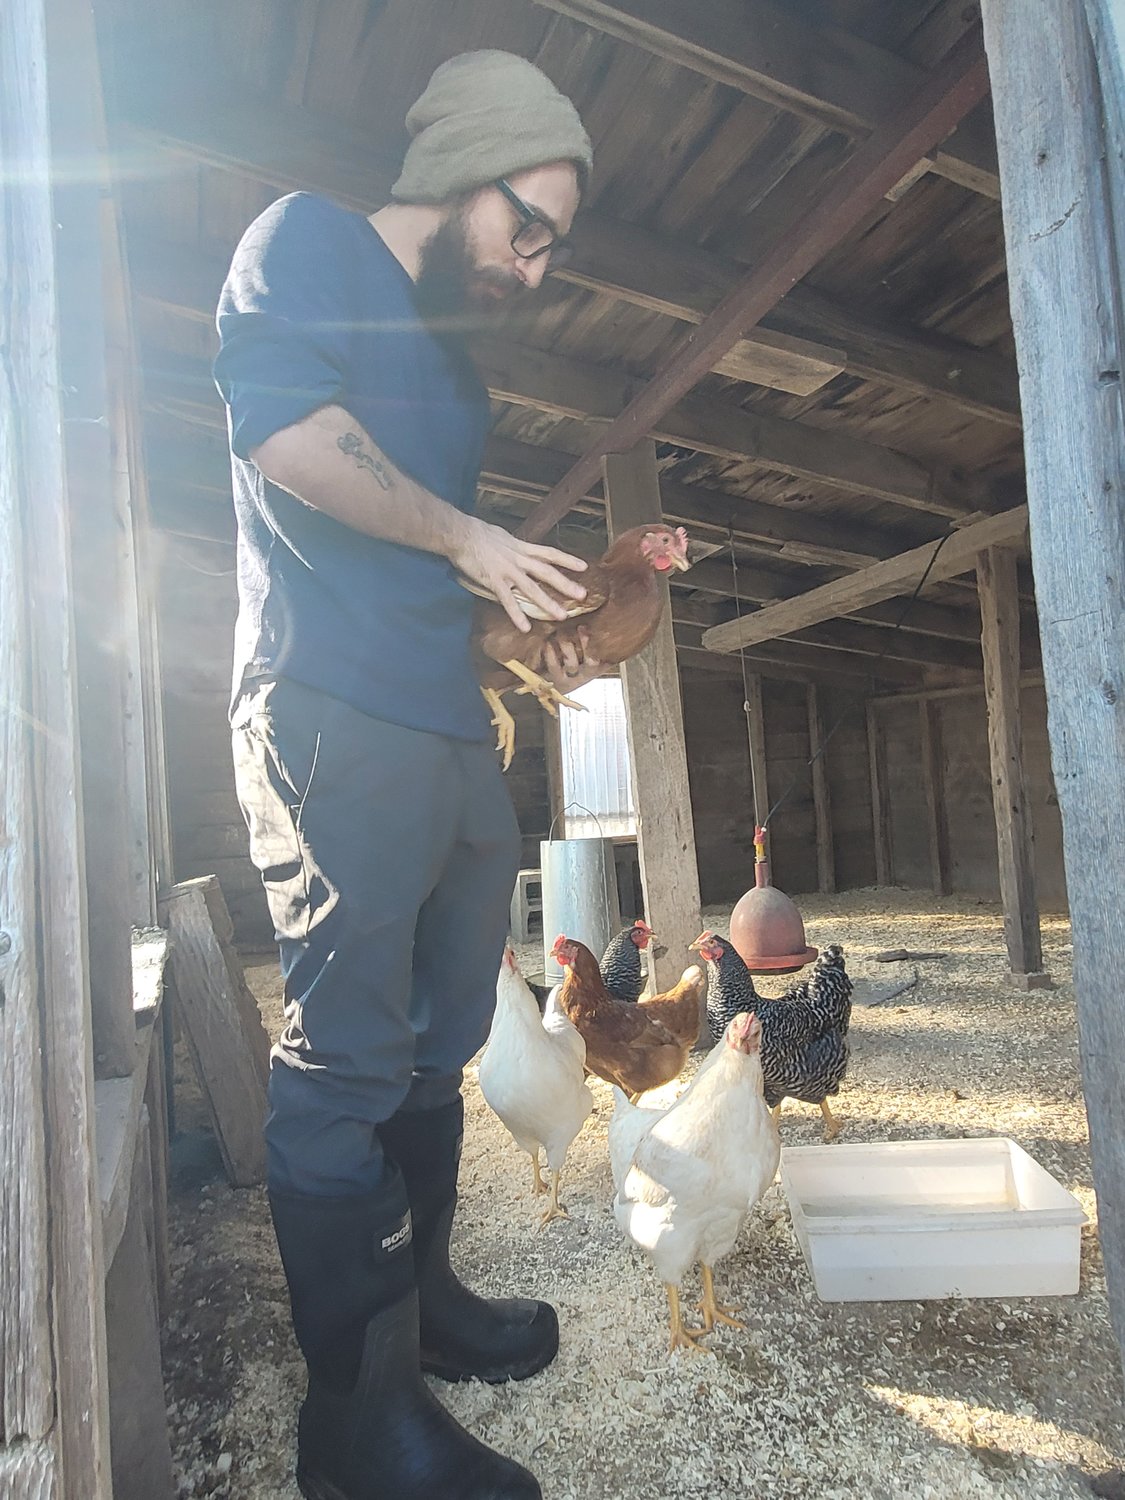 WHICH CAME FIRST: Adam Baffoni holds one of his six pet hens. He was gifted a half-dozen baby chicks by a few fraternity boys. The six chicks bloomed into two Rhode Island Reds, two Barred Rock hens and a pair of Leghorns.